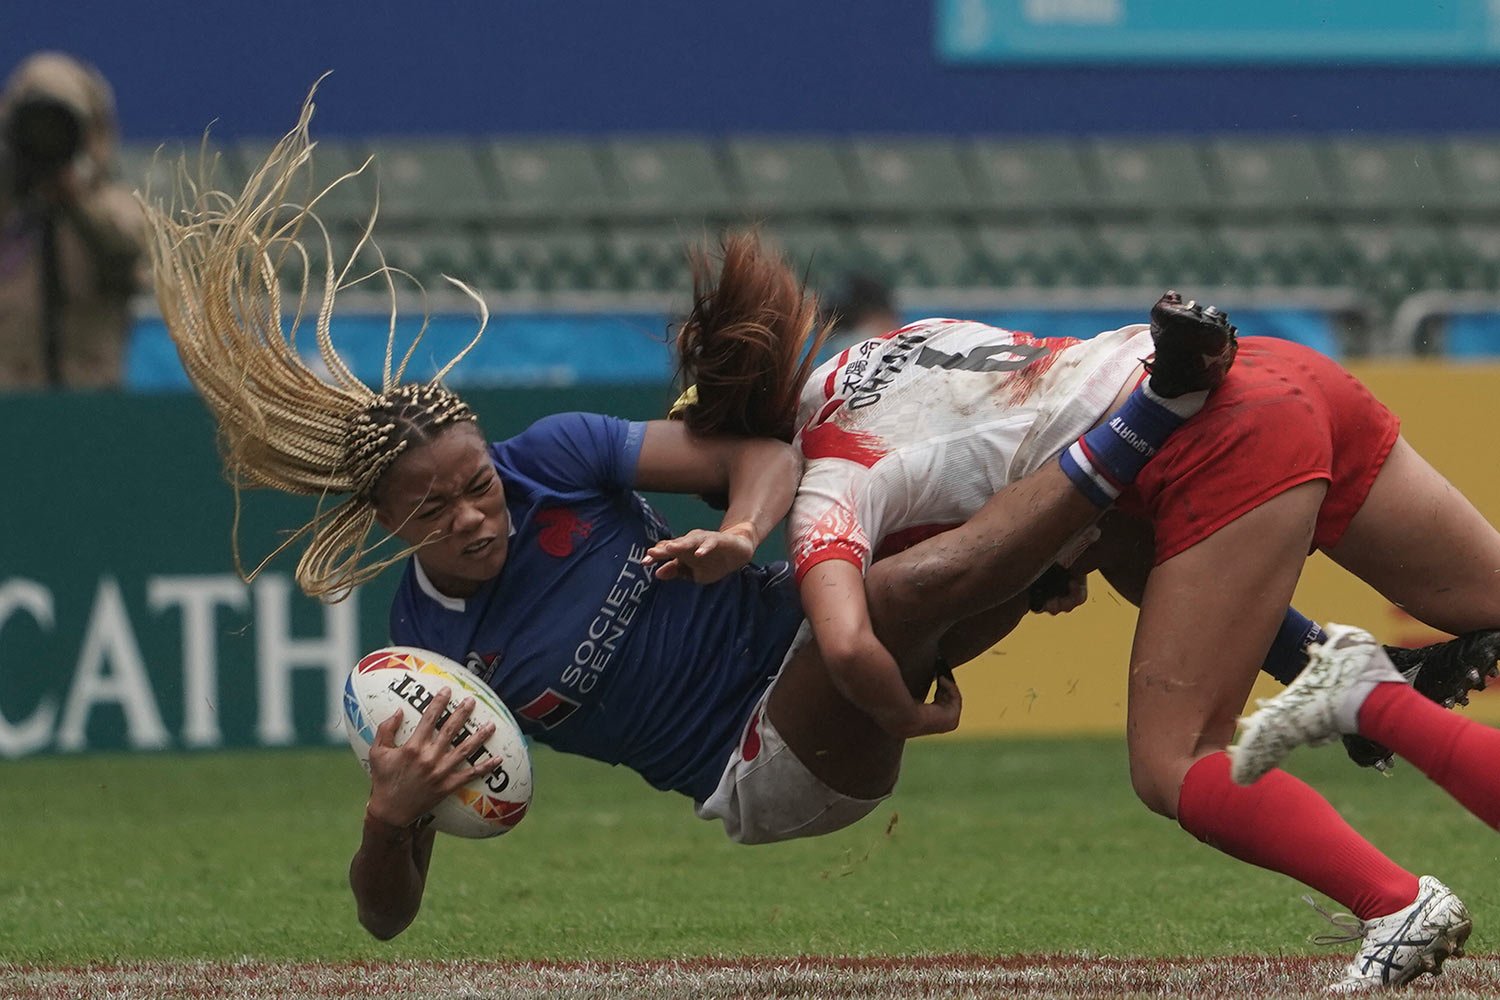  France's Ian Jason is tackled by Japan's Mei Ohtani during the first day of the Hong Kong Sevens rugby tournament in Hong Kong, Friday, March 31, 2023. (AP Photo/Anthony Kwan) 